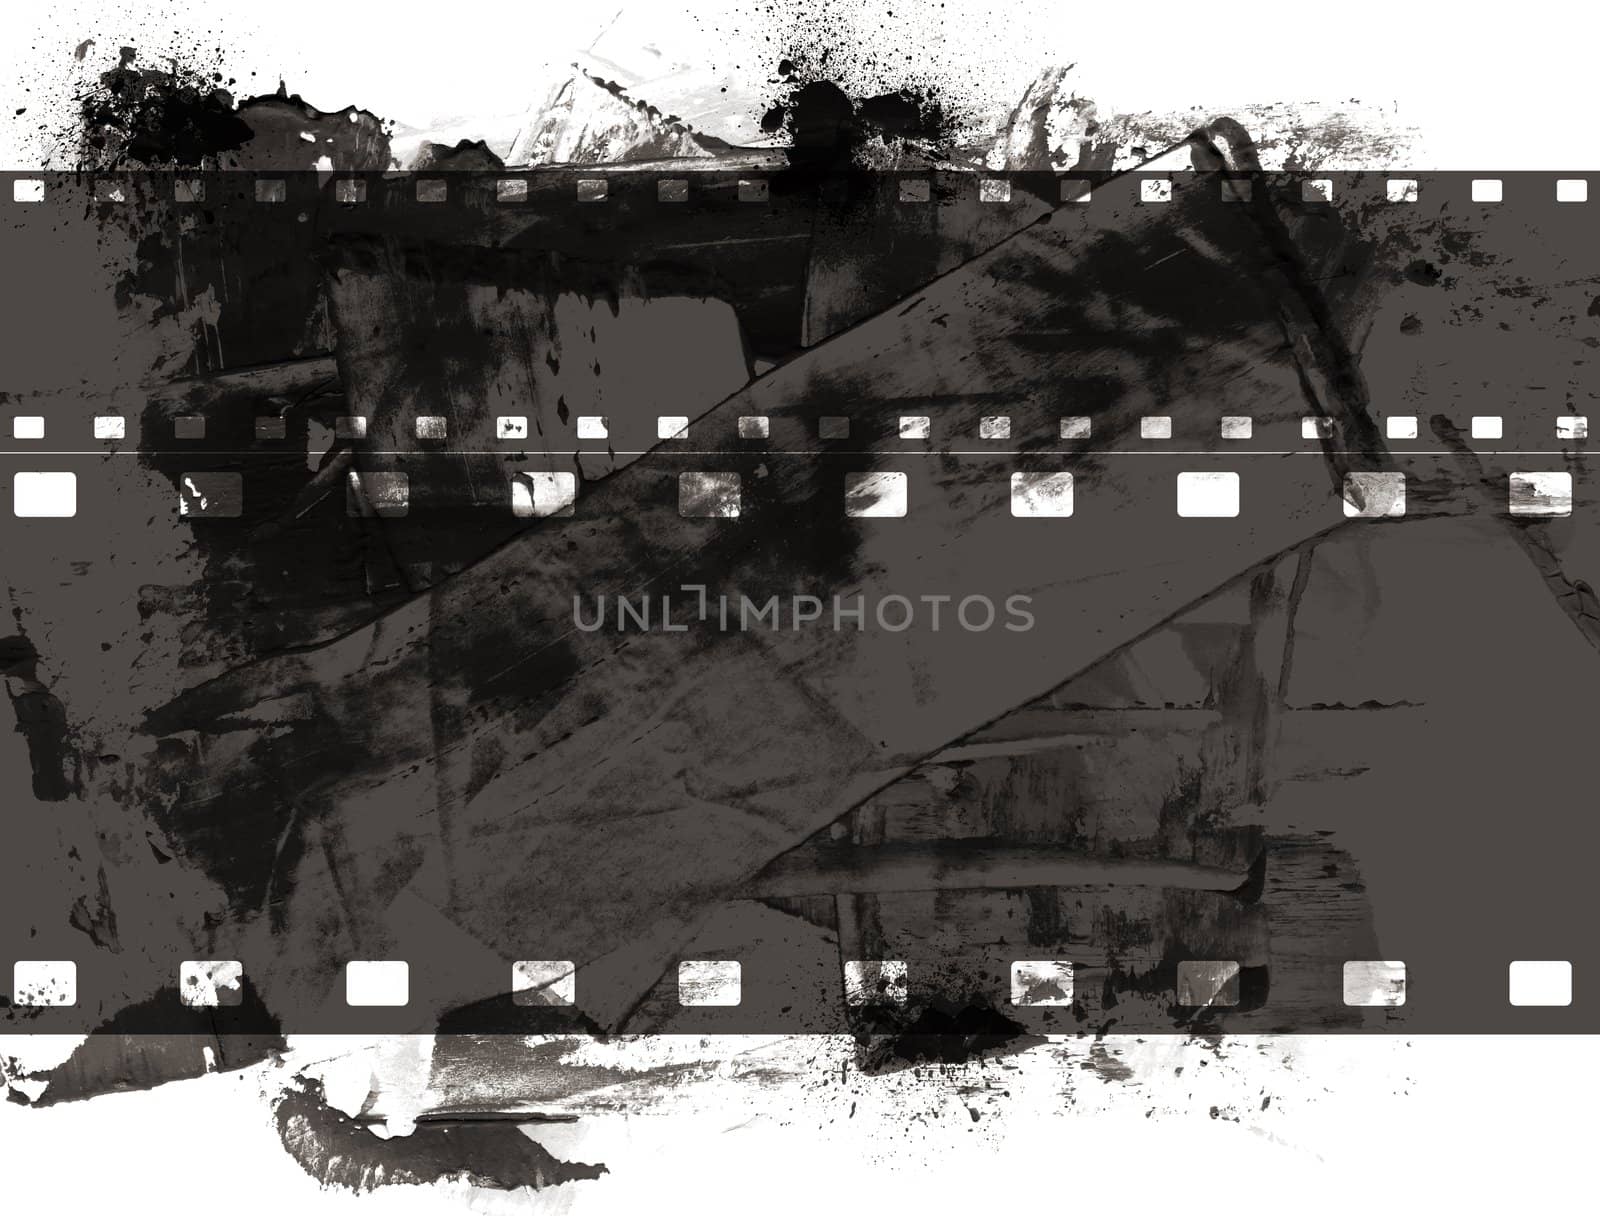 High detailed grunge film frame with space for your text or image.